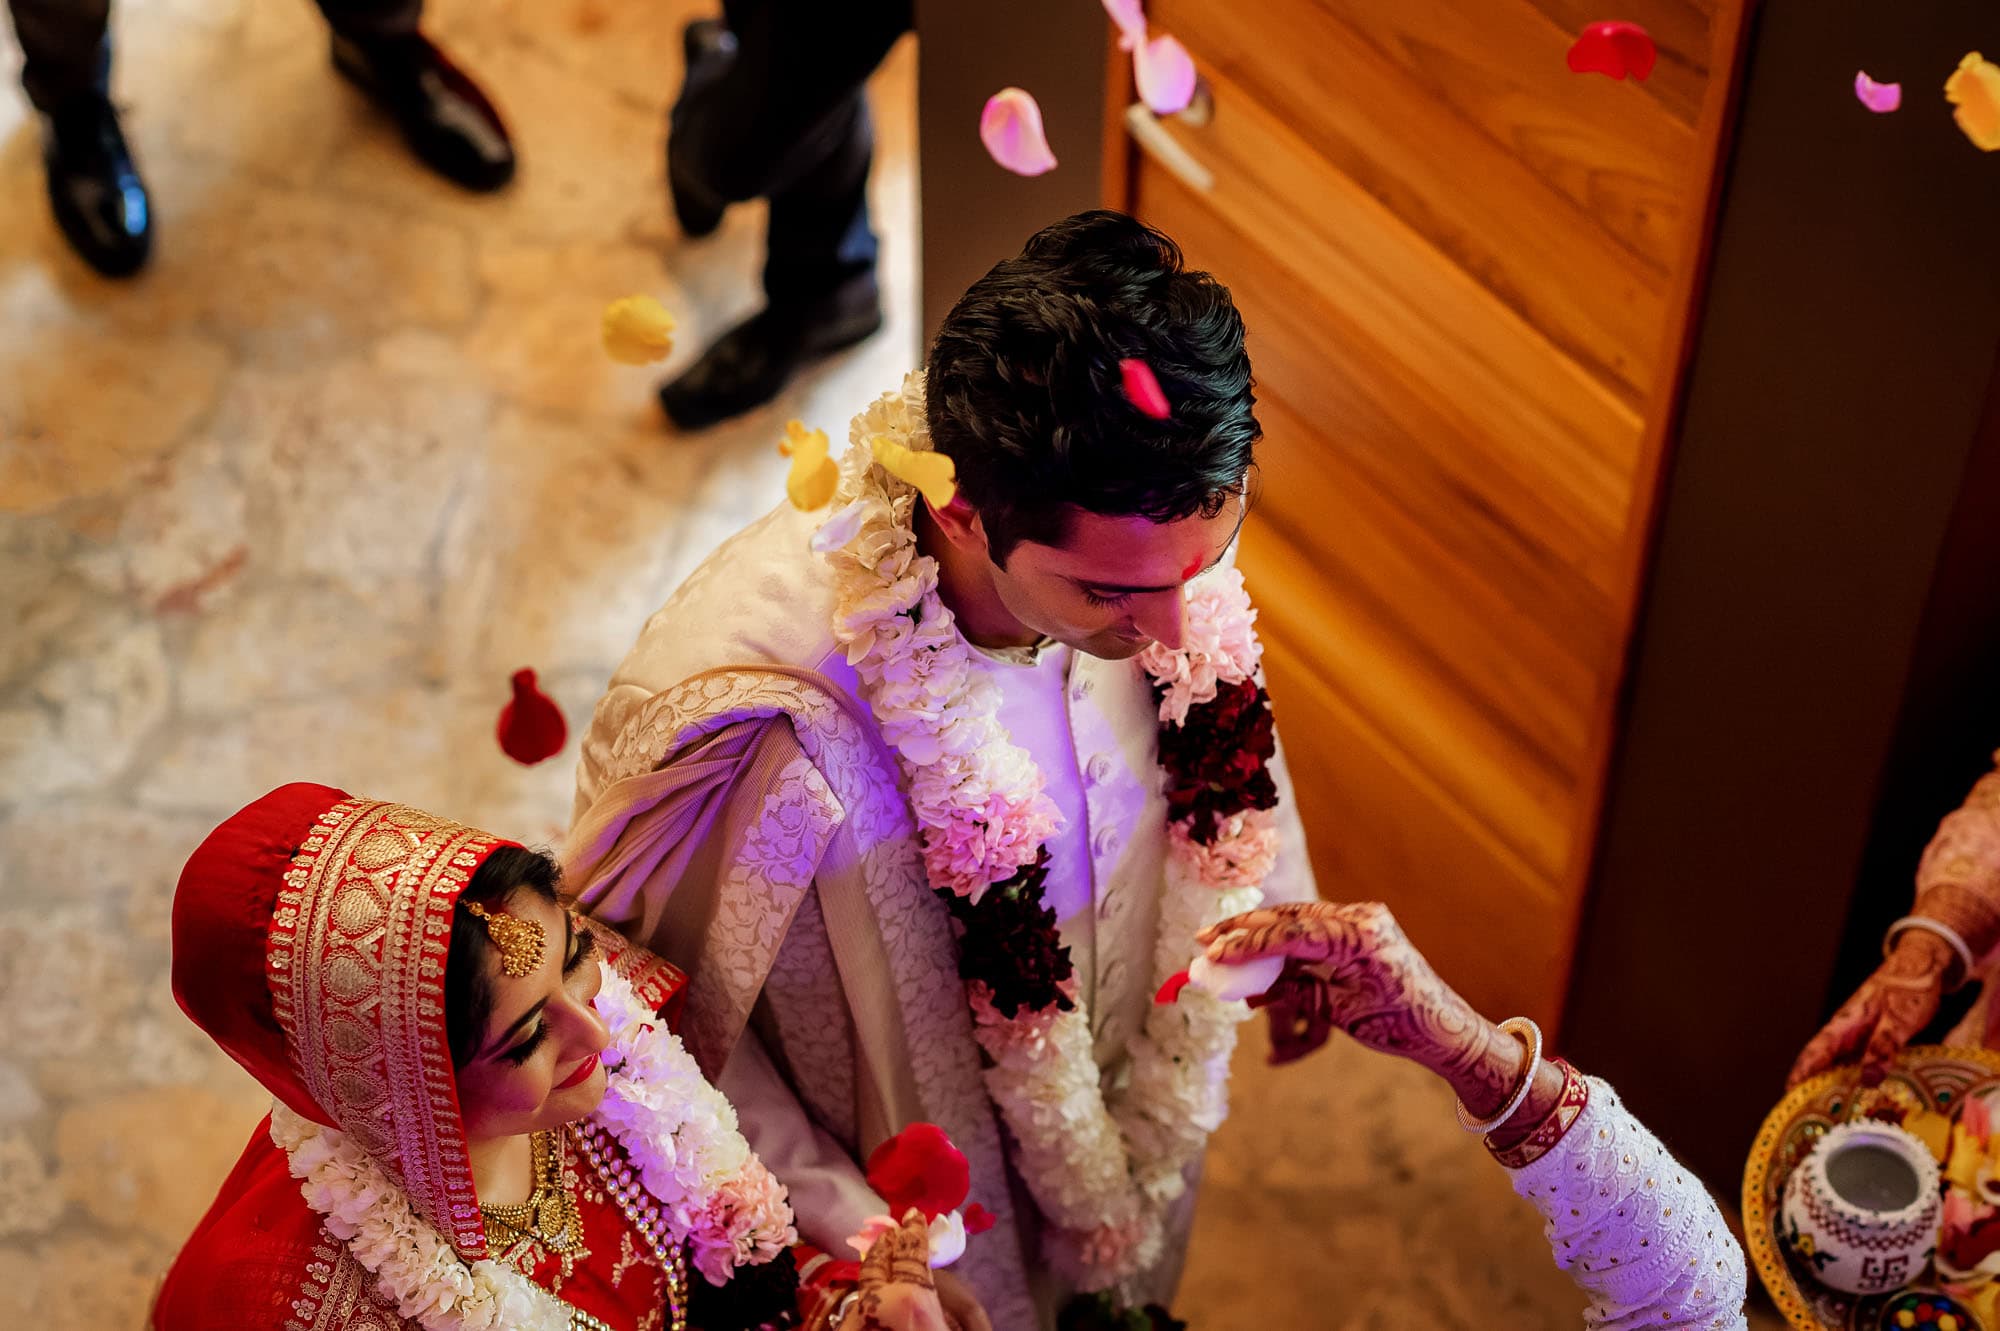 Throwing flower petals on the couple to bless them with prosperity and happiness